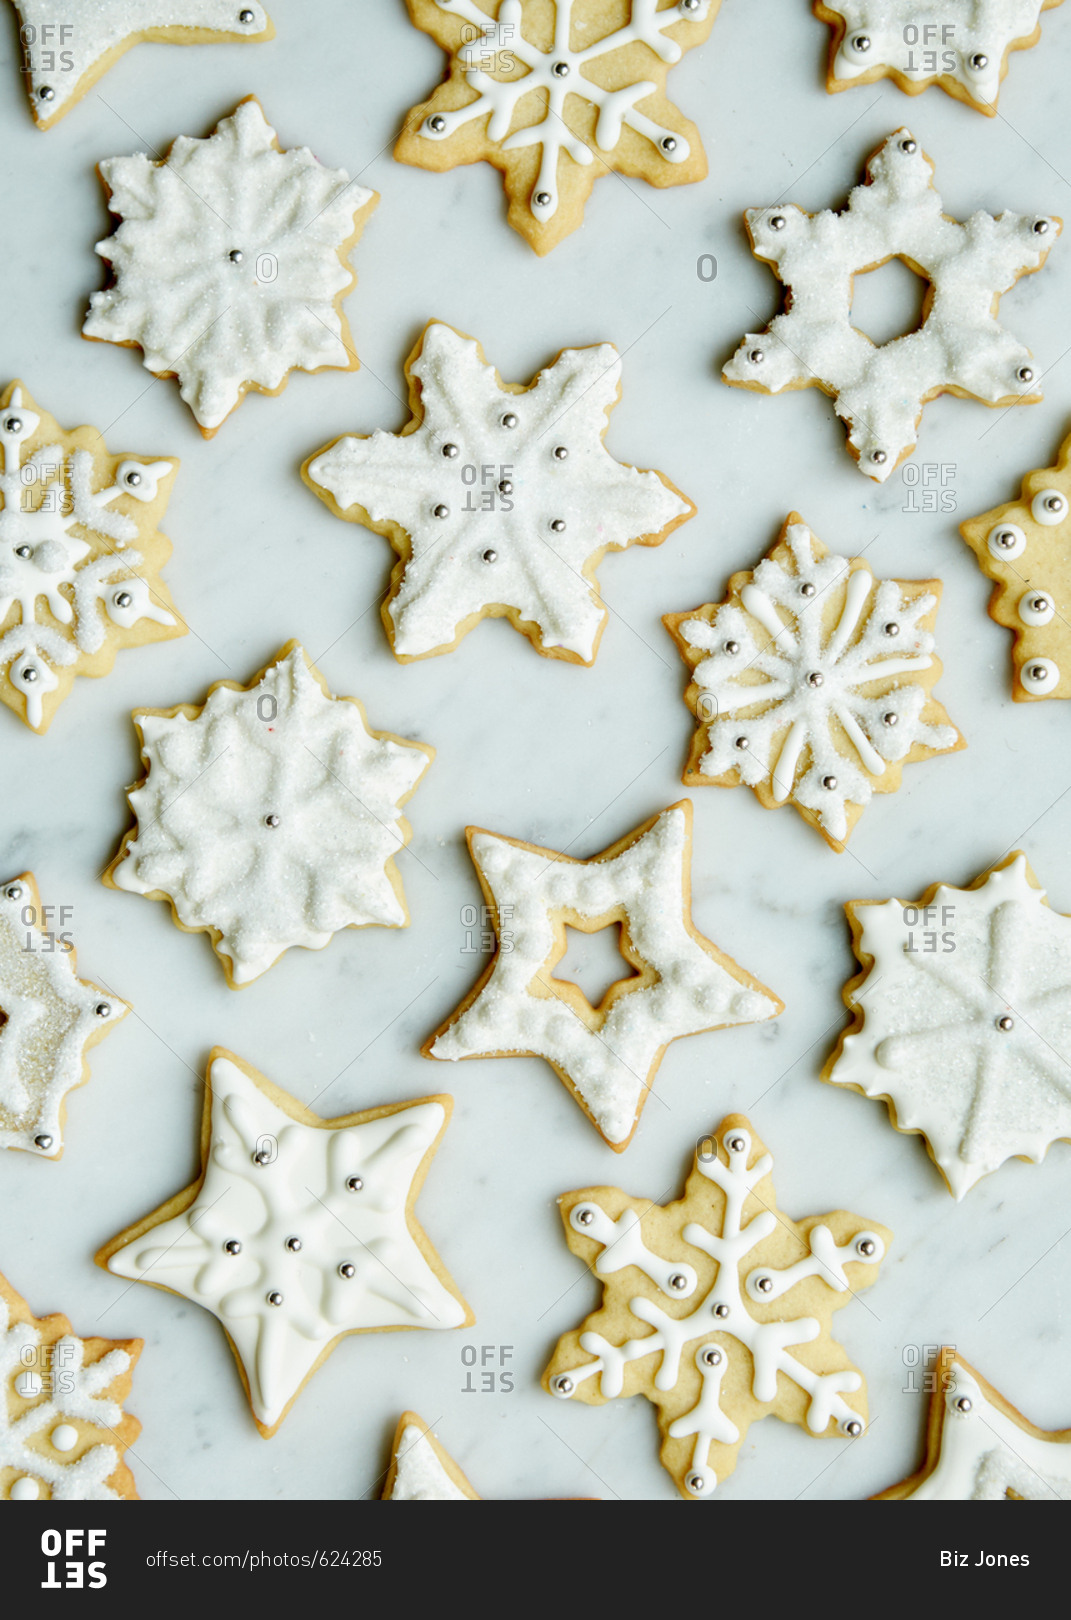 Fancy winter sugar cookies decorated with royal icing and sprinkles on a white marble surface